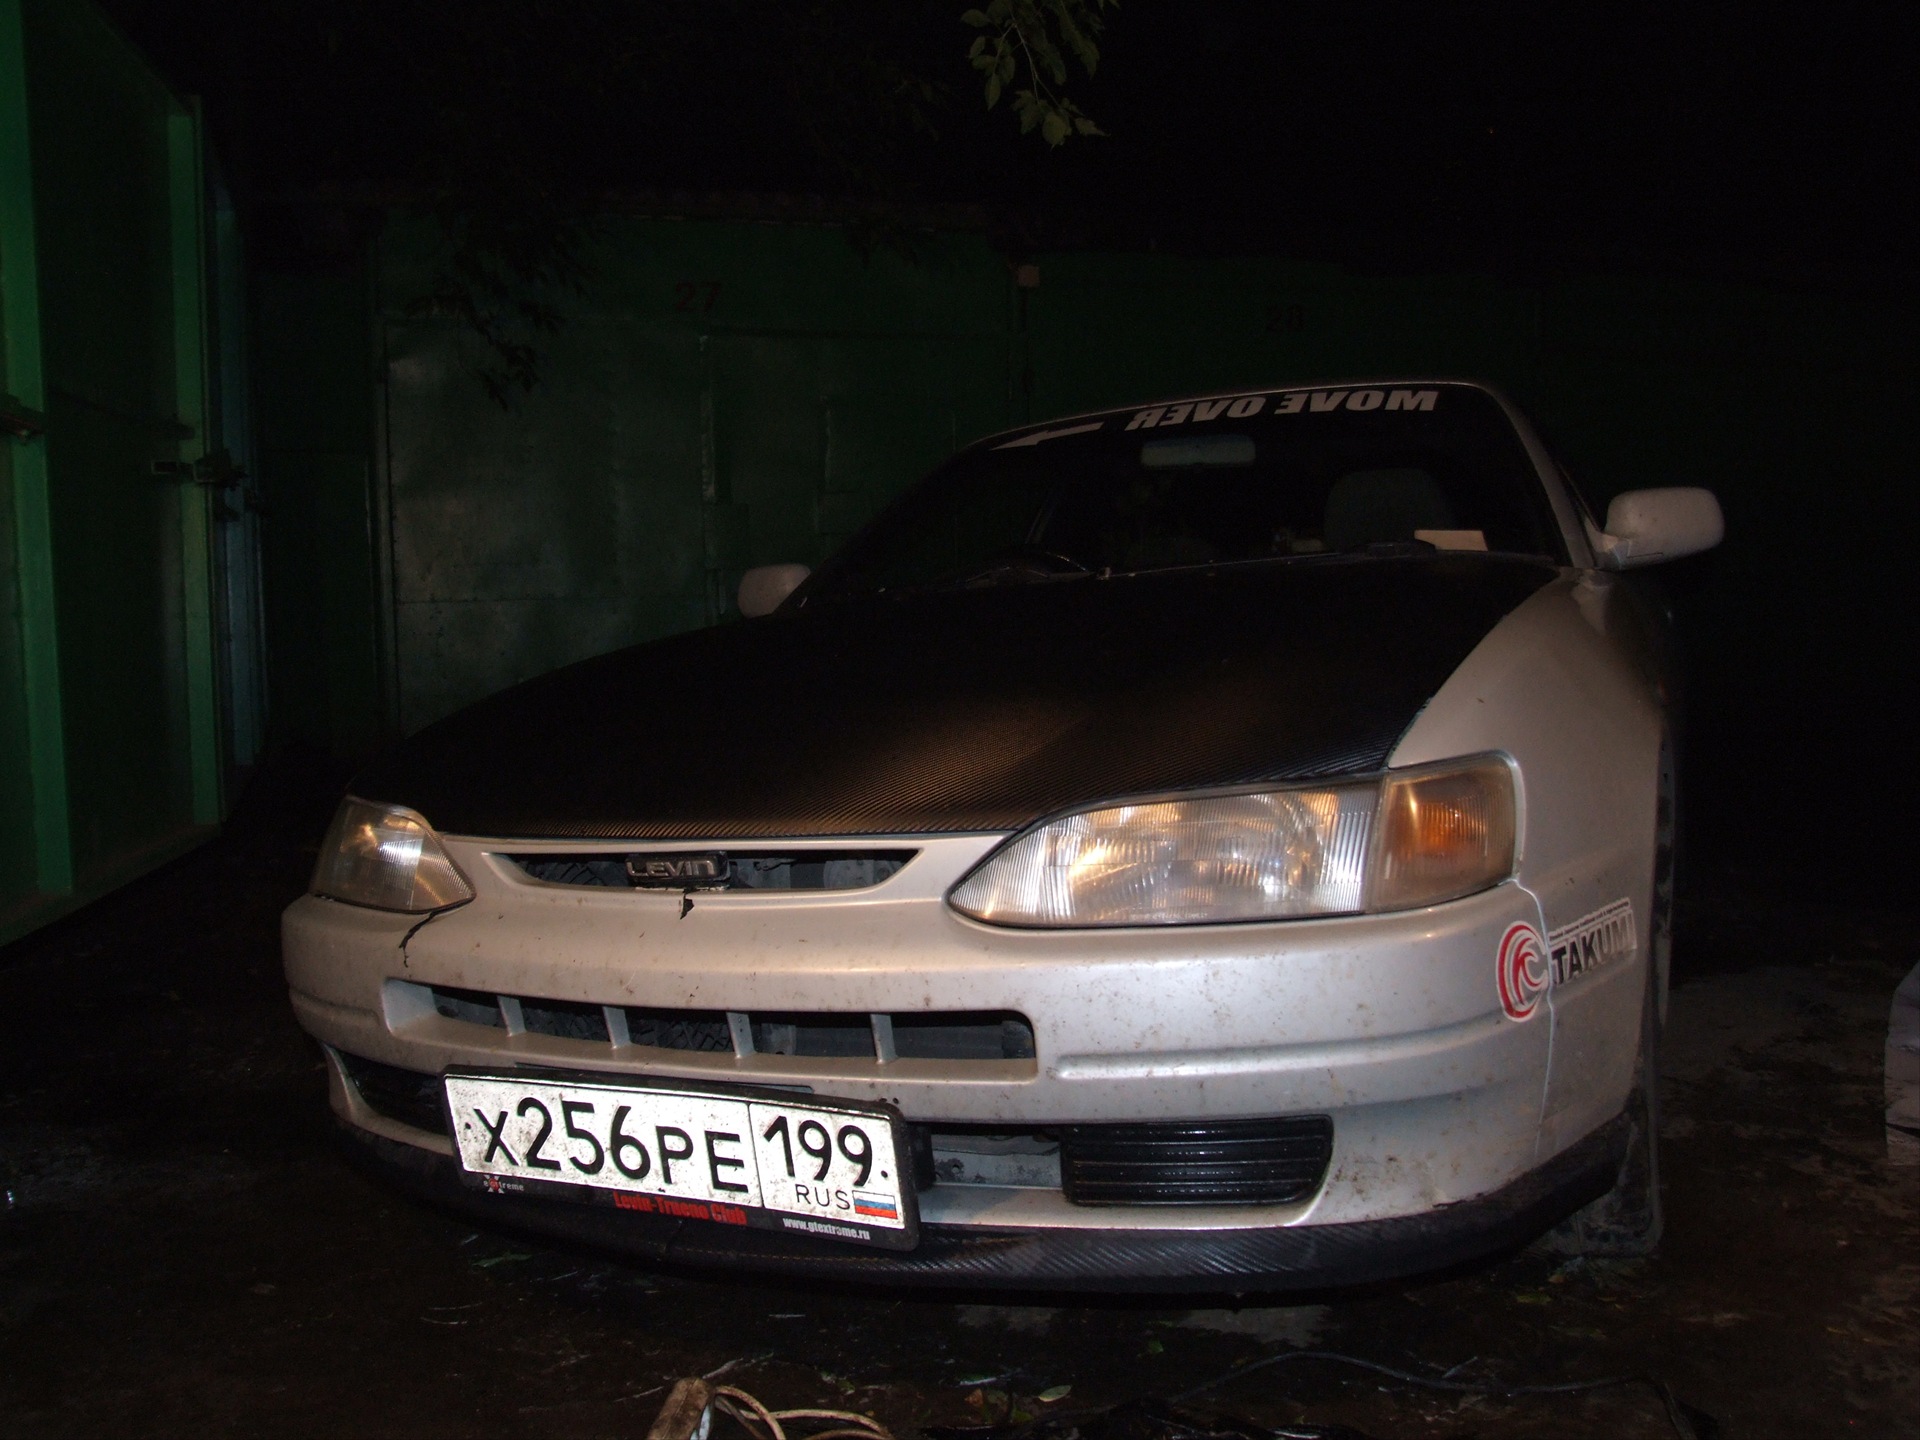 collective farm number 1 - Toyota Corolla Levin 20 liter 1996